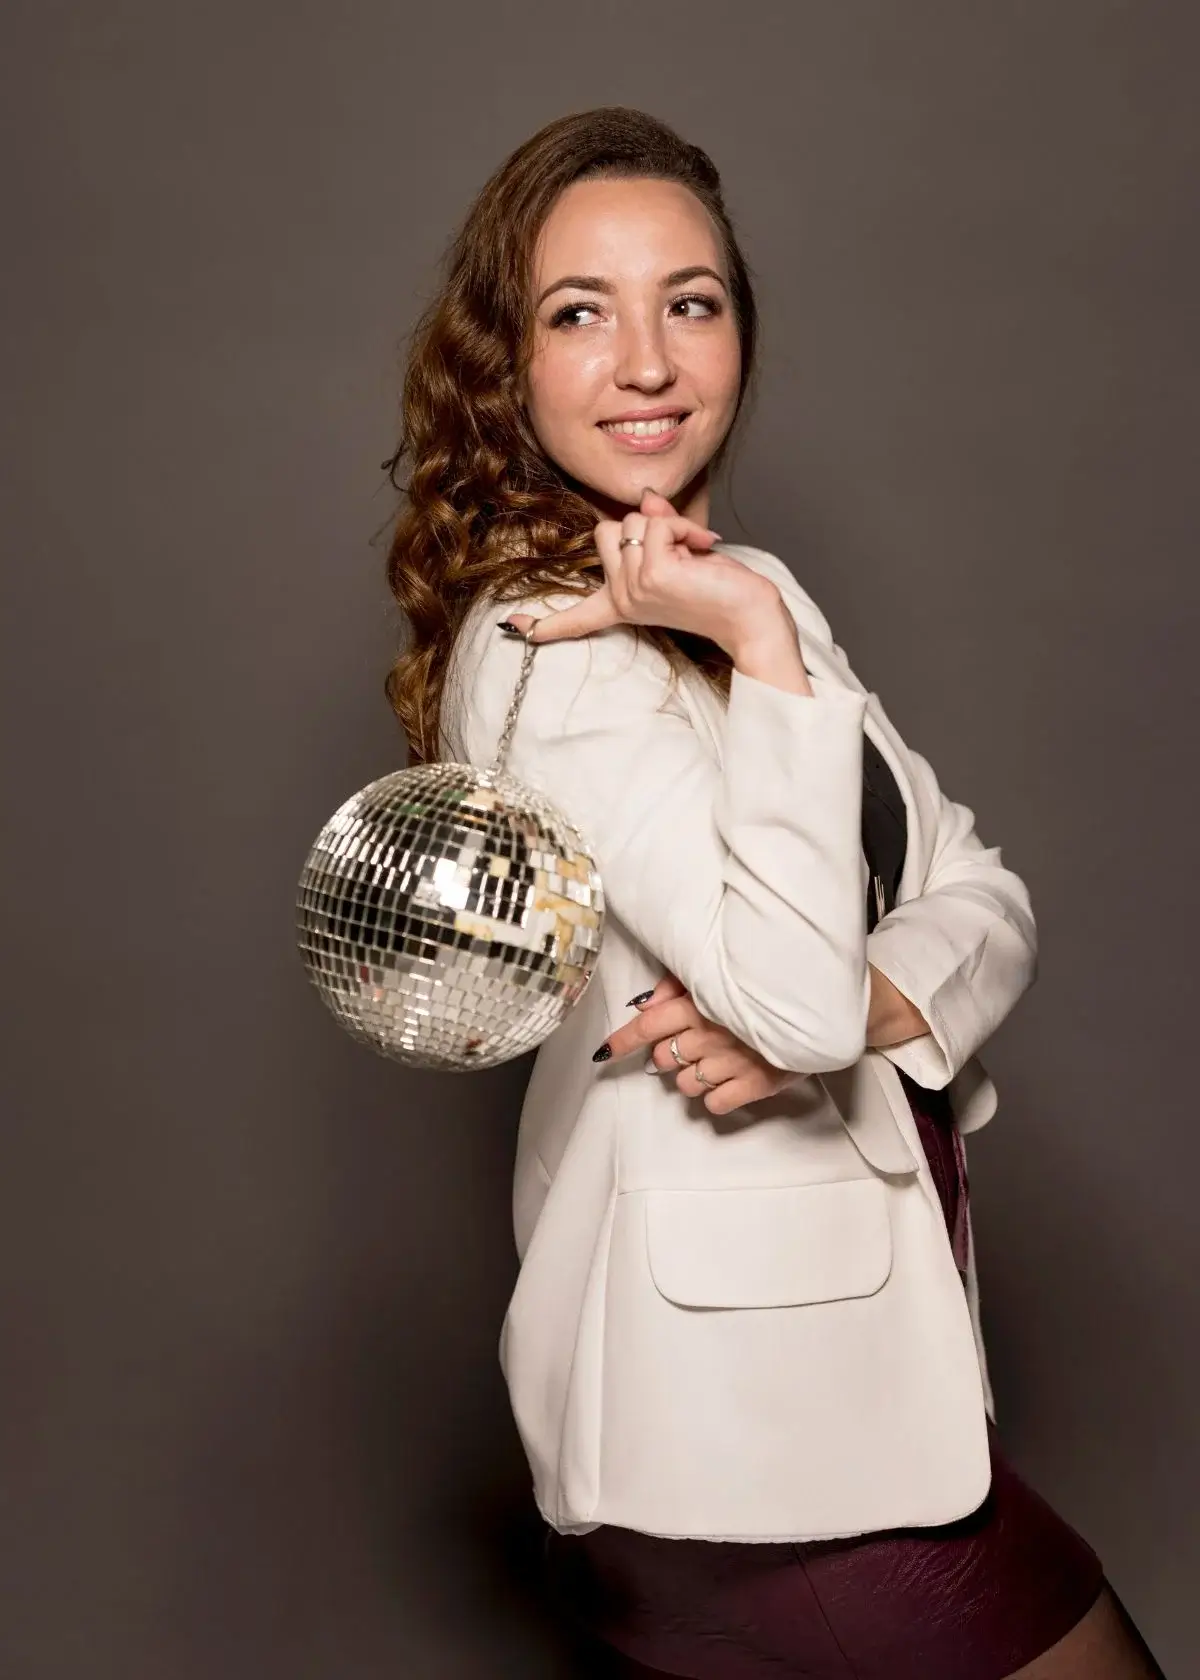 How to choose the right disco ball purse?